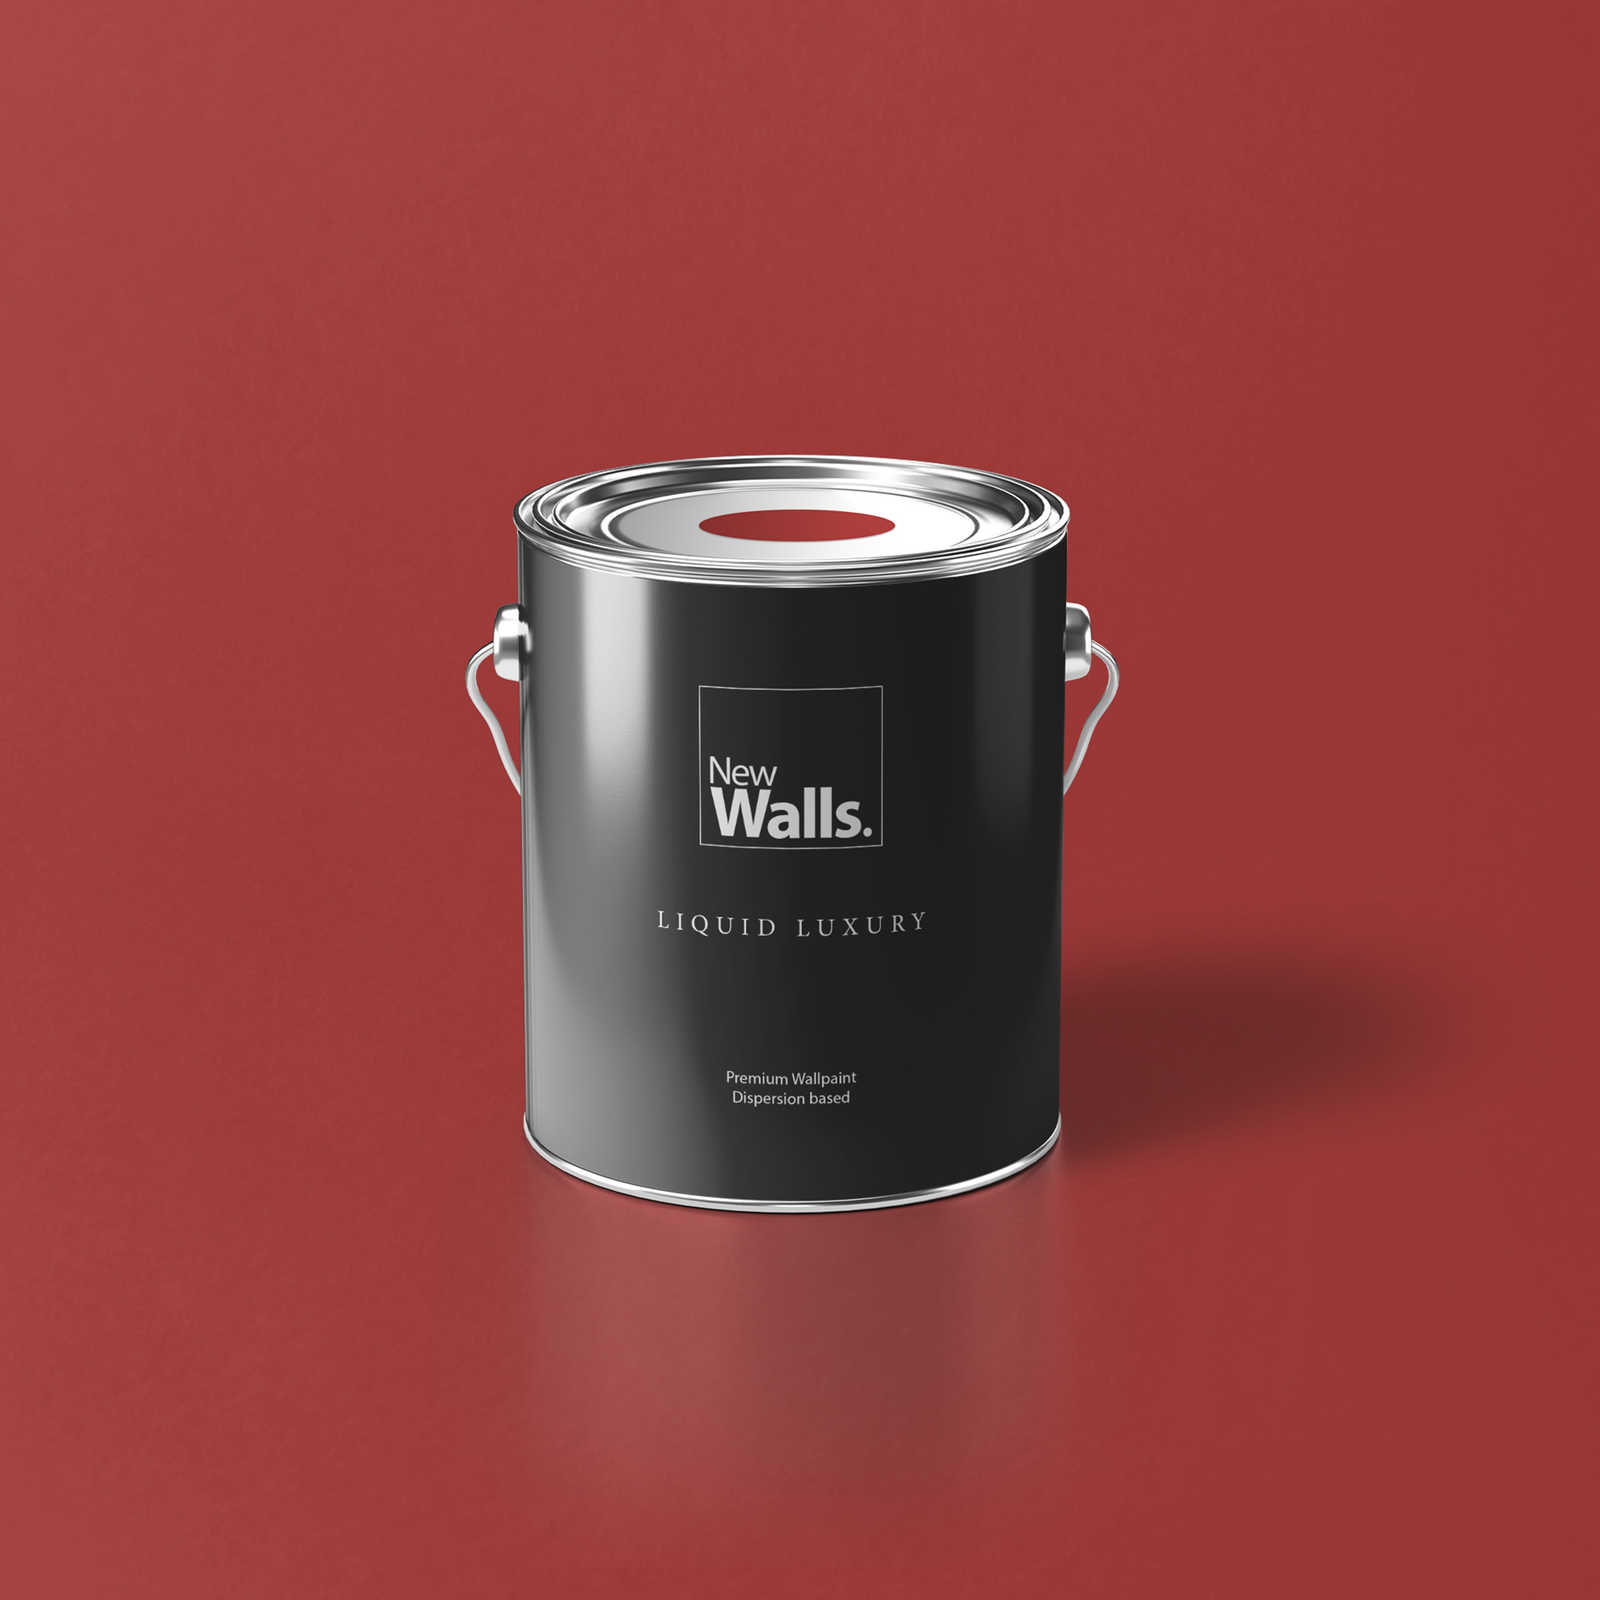 Premium Wall Paint passionate fireplace red »Luxury Lipstick« NW1002 – 2.5 litre
